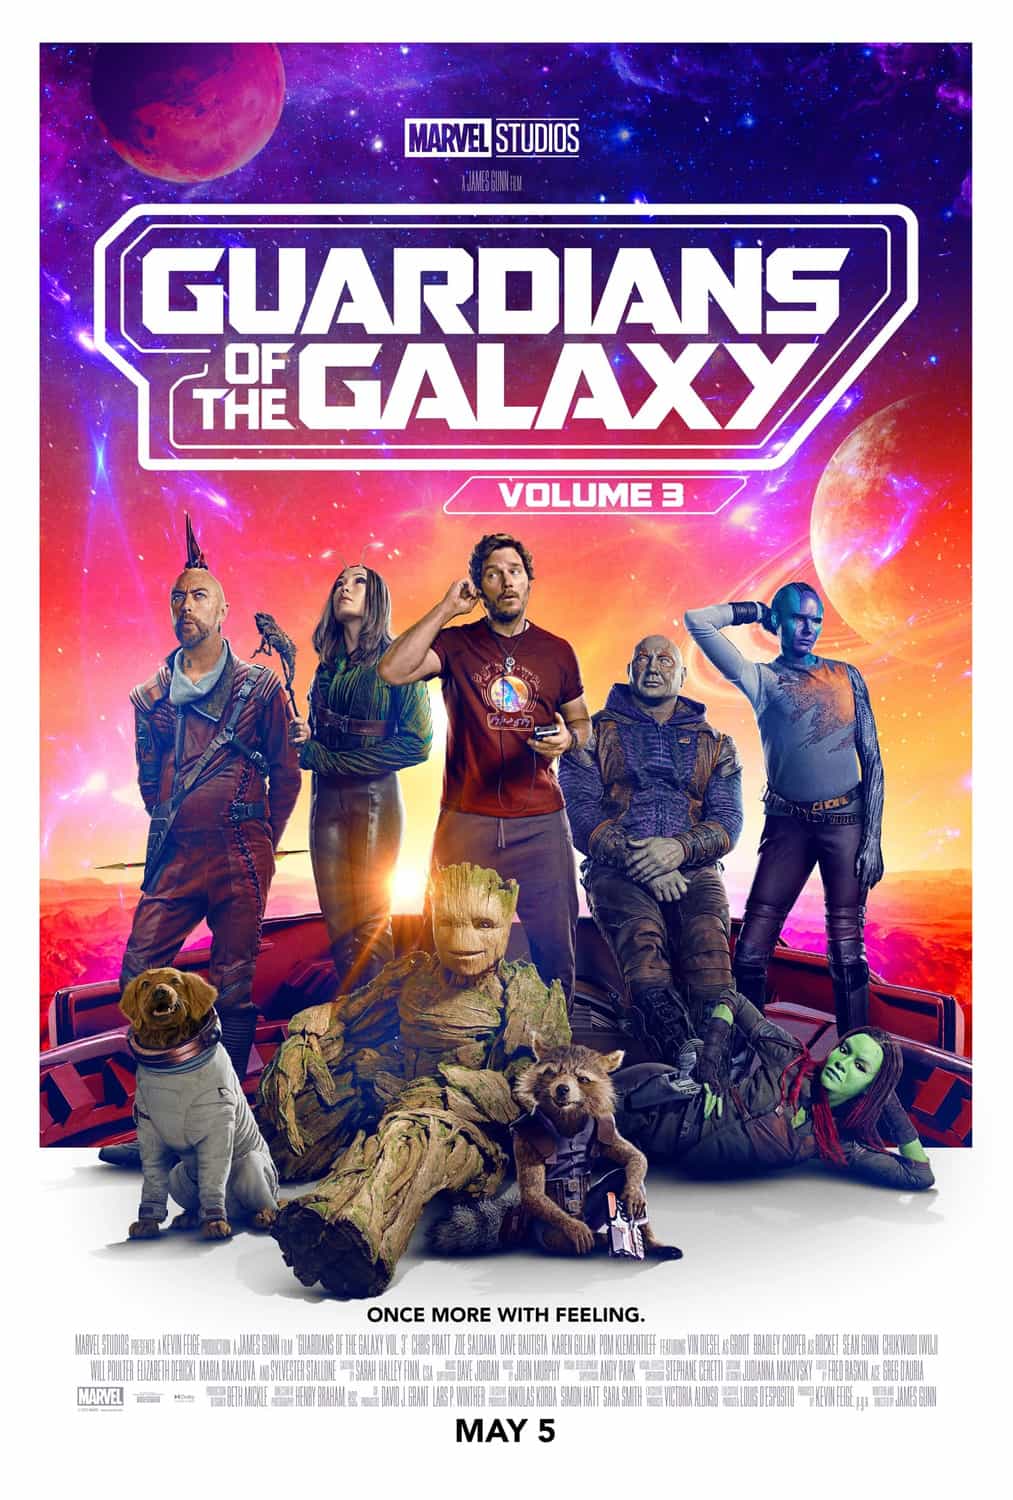 Guardians of the Galaxy Vol 3 is given a 12A age rating in the UK for moderate violence, injury detail, threat, infrequent strong language